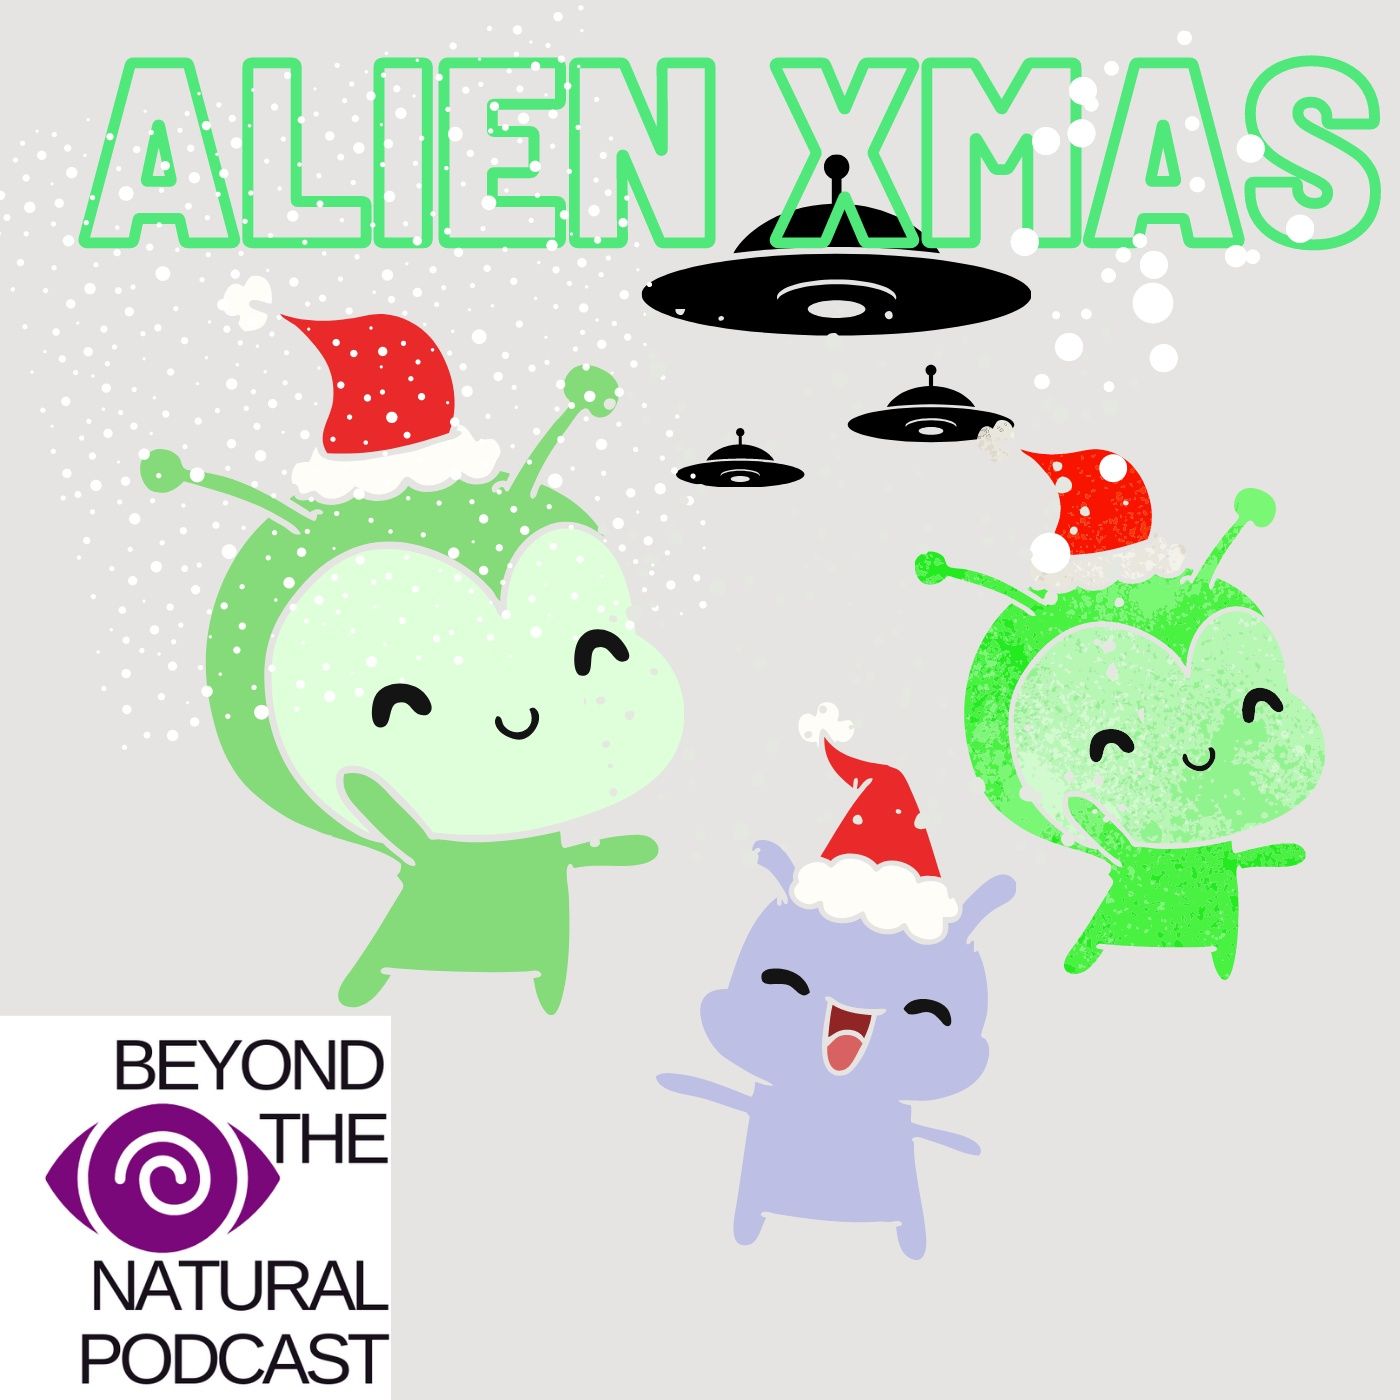 A Very Alien Christmas Story and their Involvement on Earth